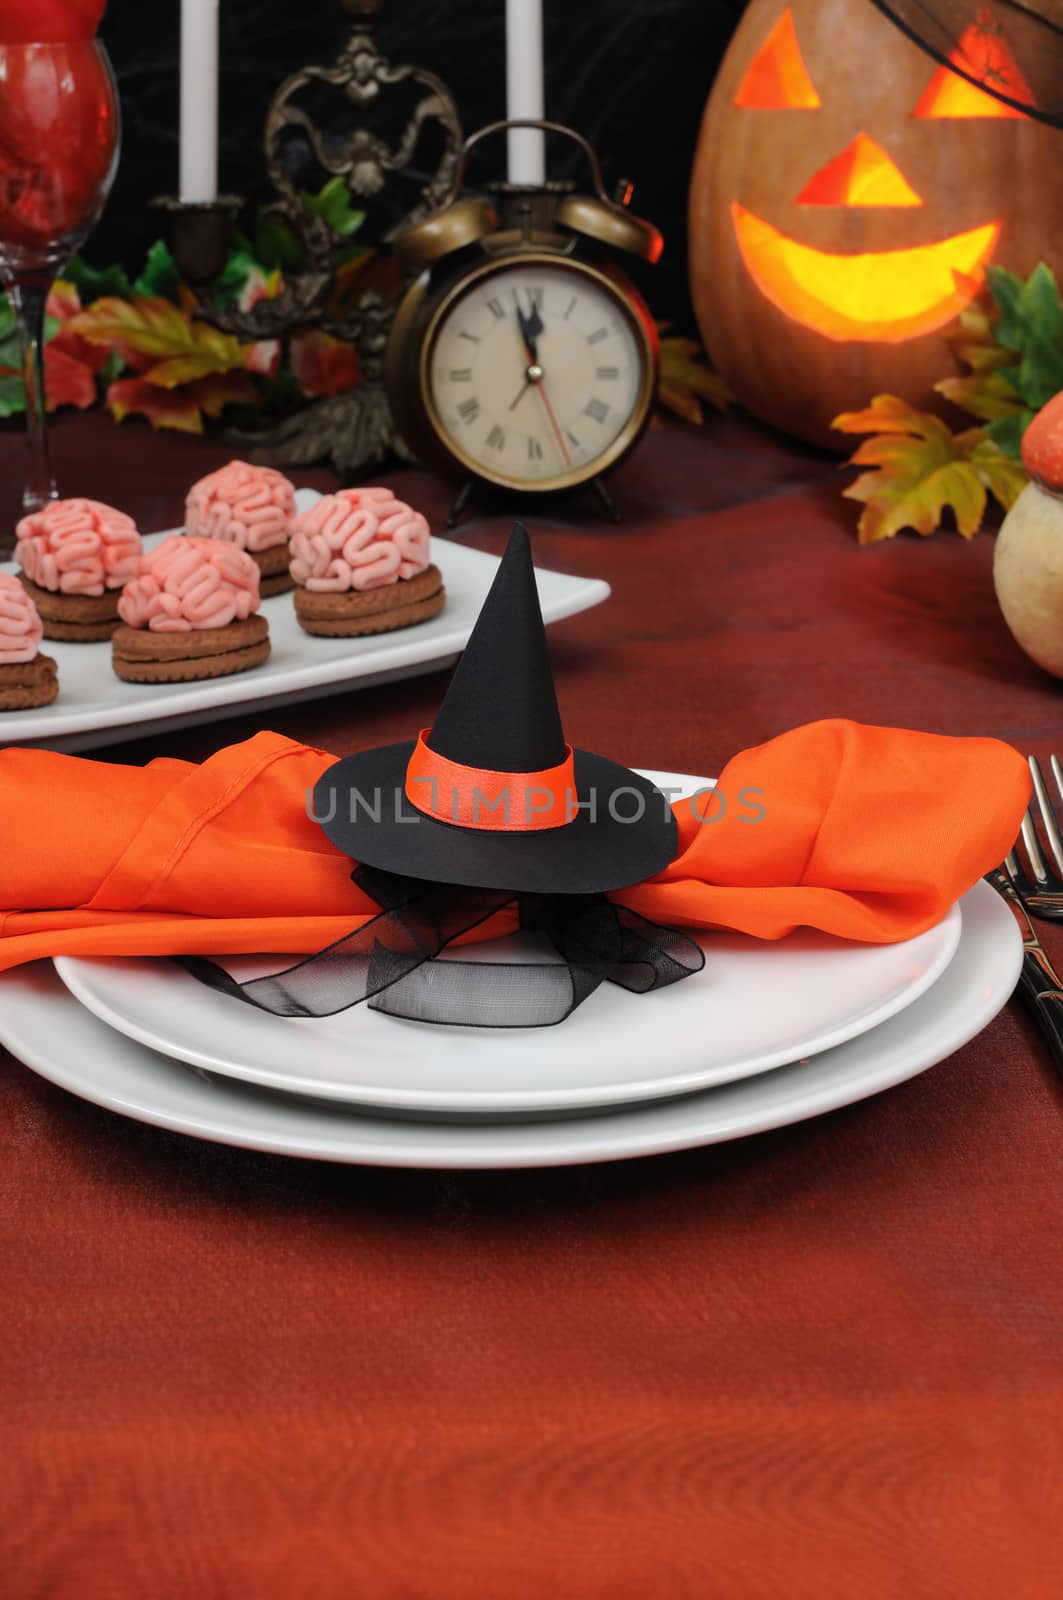 Napkin related witch hat for Halloween by Apolonia